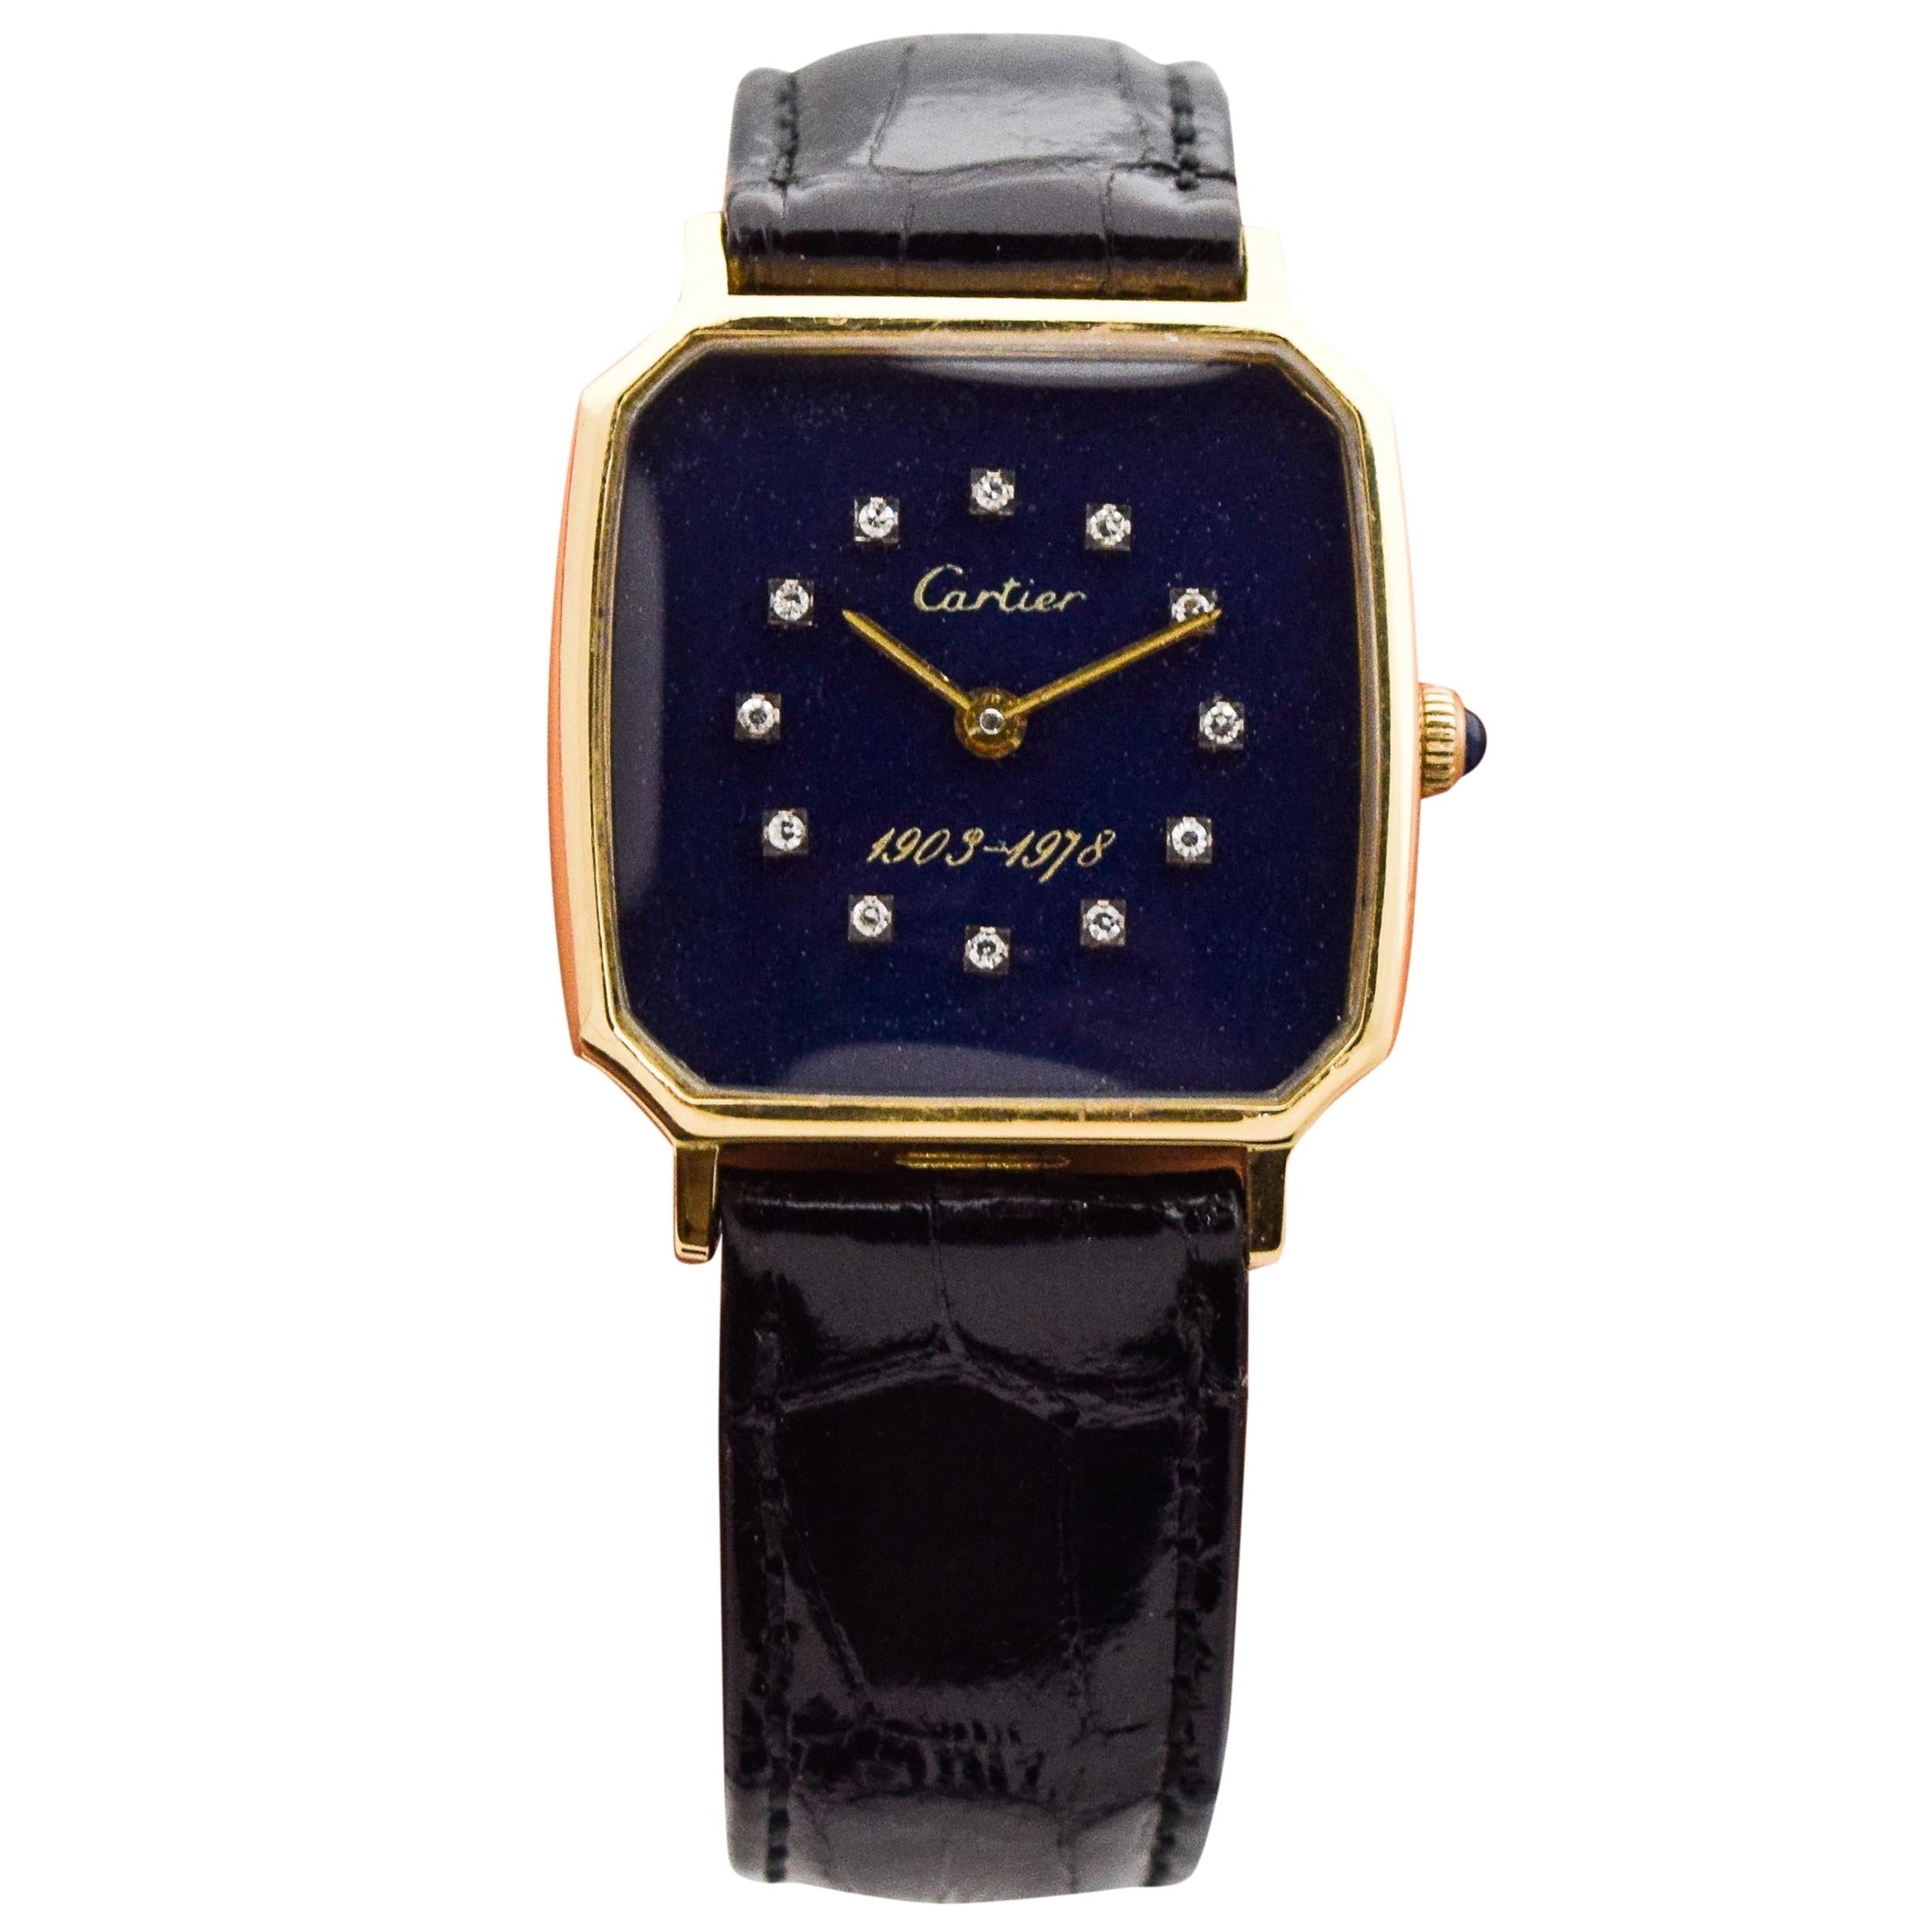 Cartier "75th Anniversary for Ford Motor Company" 18 Karat Gold Watch, 1978